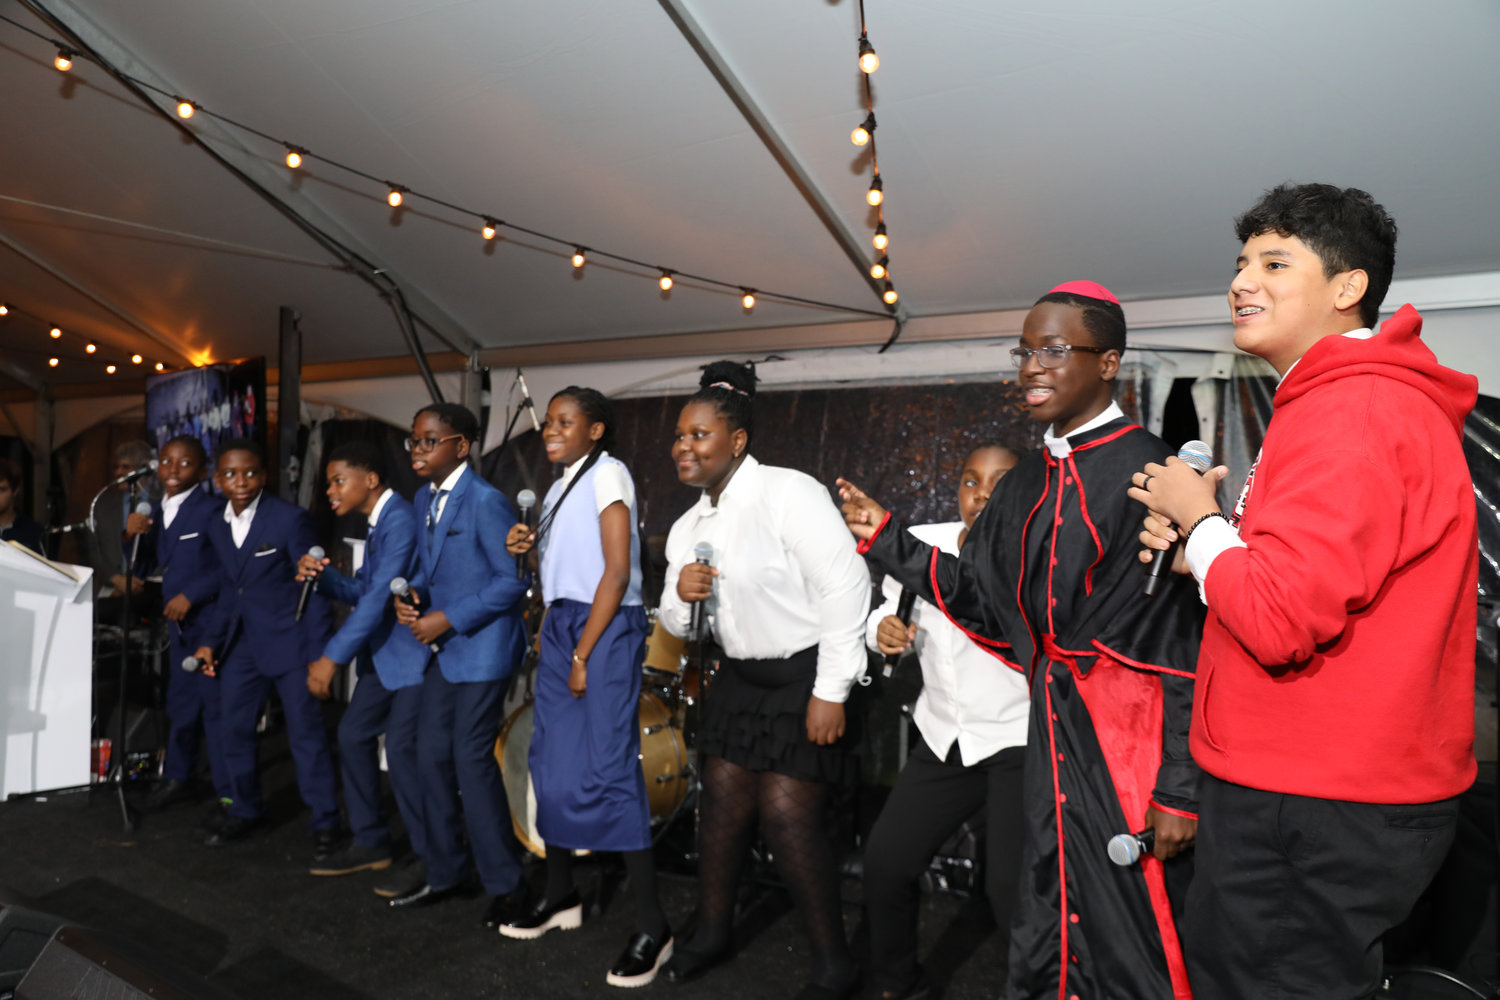 Students from St. Francis of Assisi School, including one dressed as a cardinal, perform at the Inner-City Scholarship Fund’s 50th Anniversary Celebration at Wave Hill in the Bronx Sept. 23.